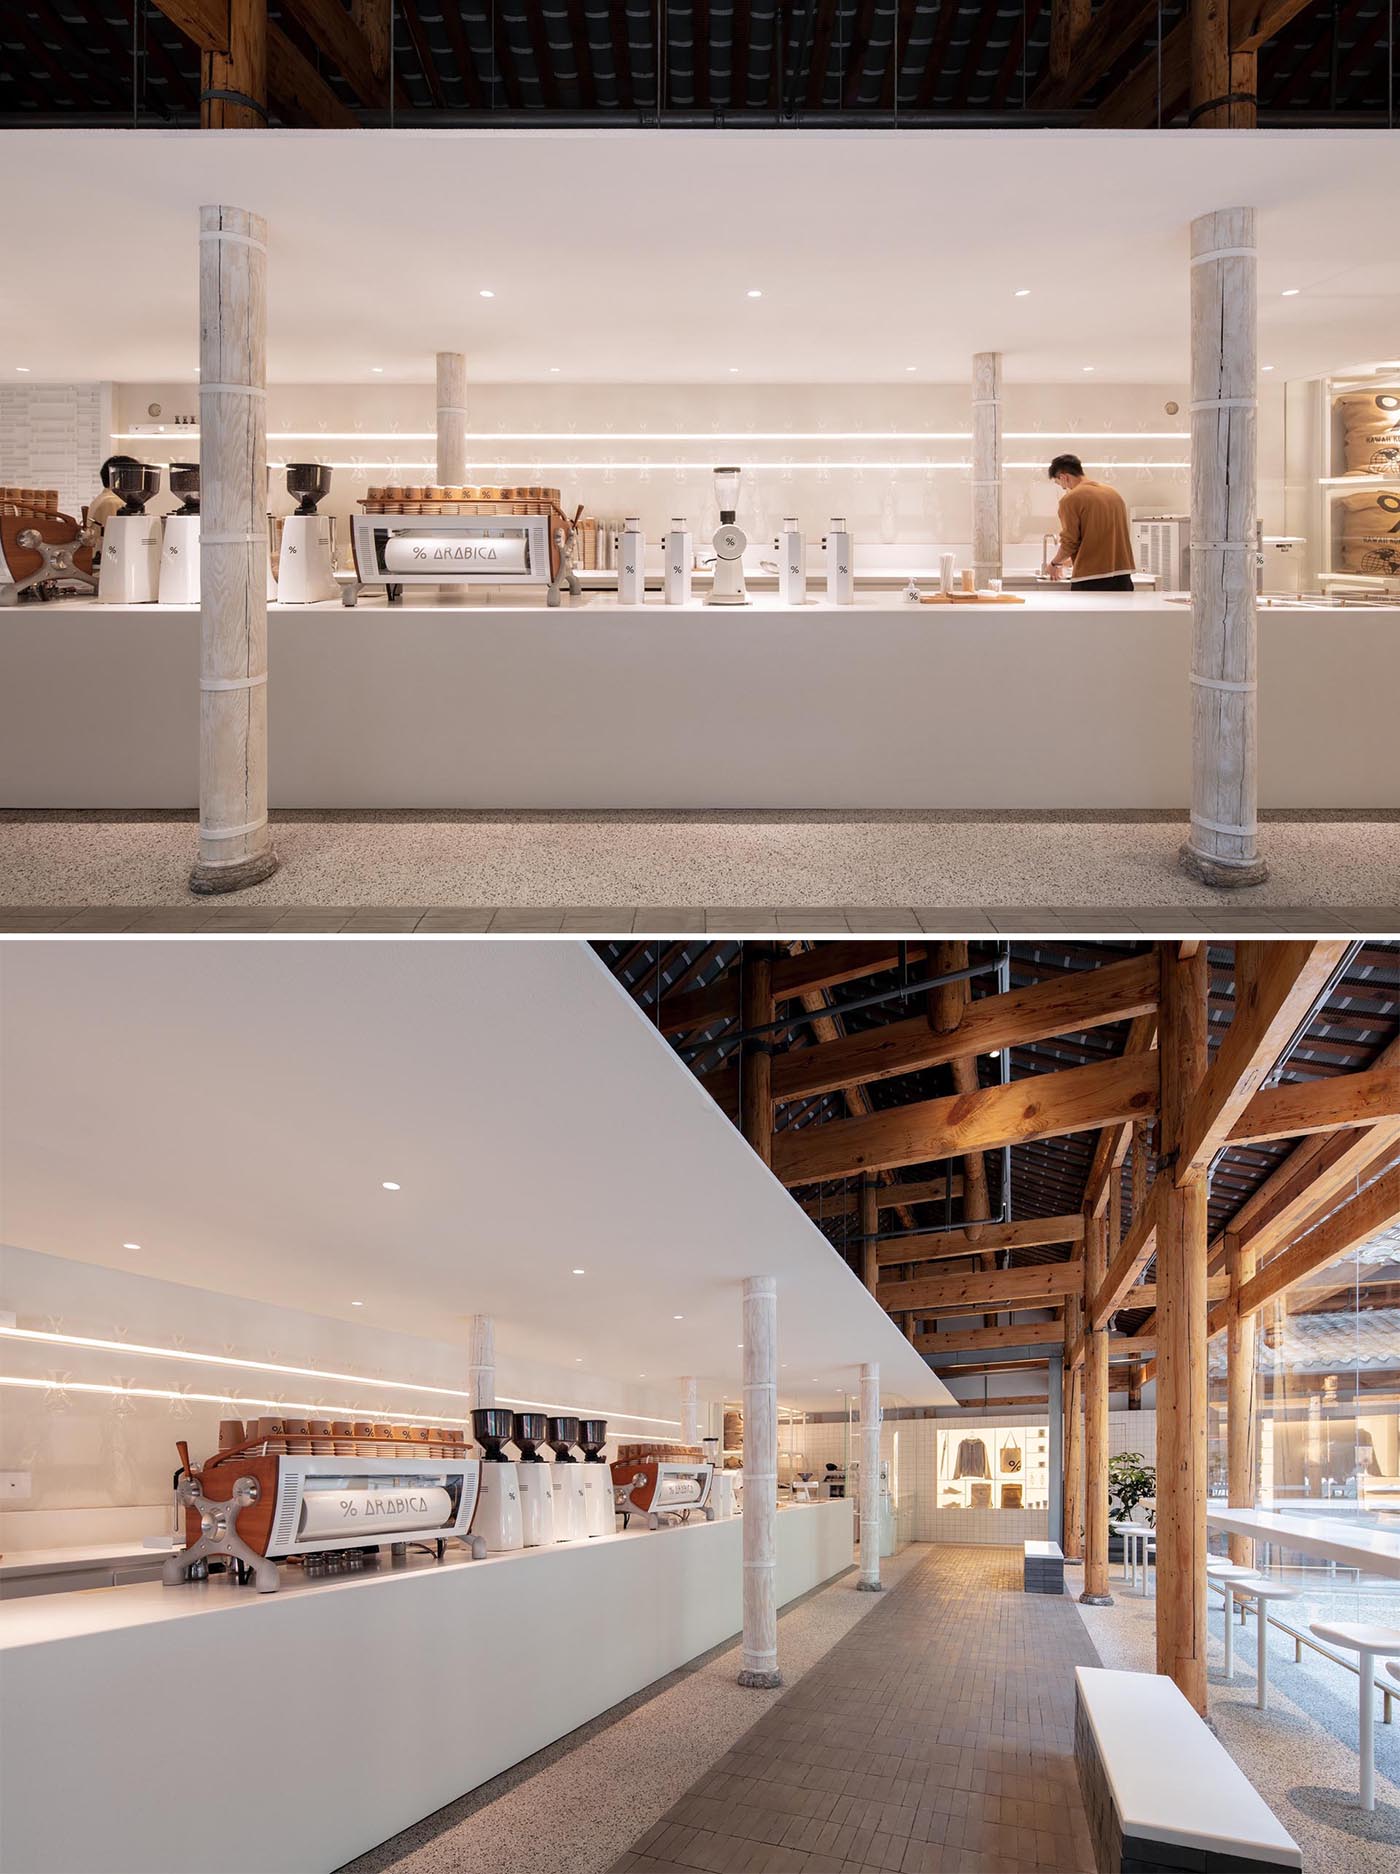 White was used to create a clean and minimalist look for this modern coffee shop.